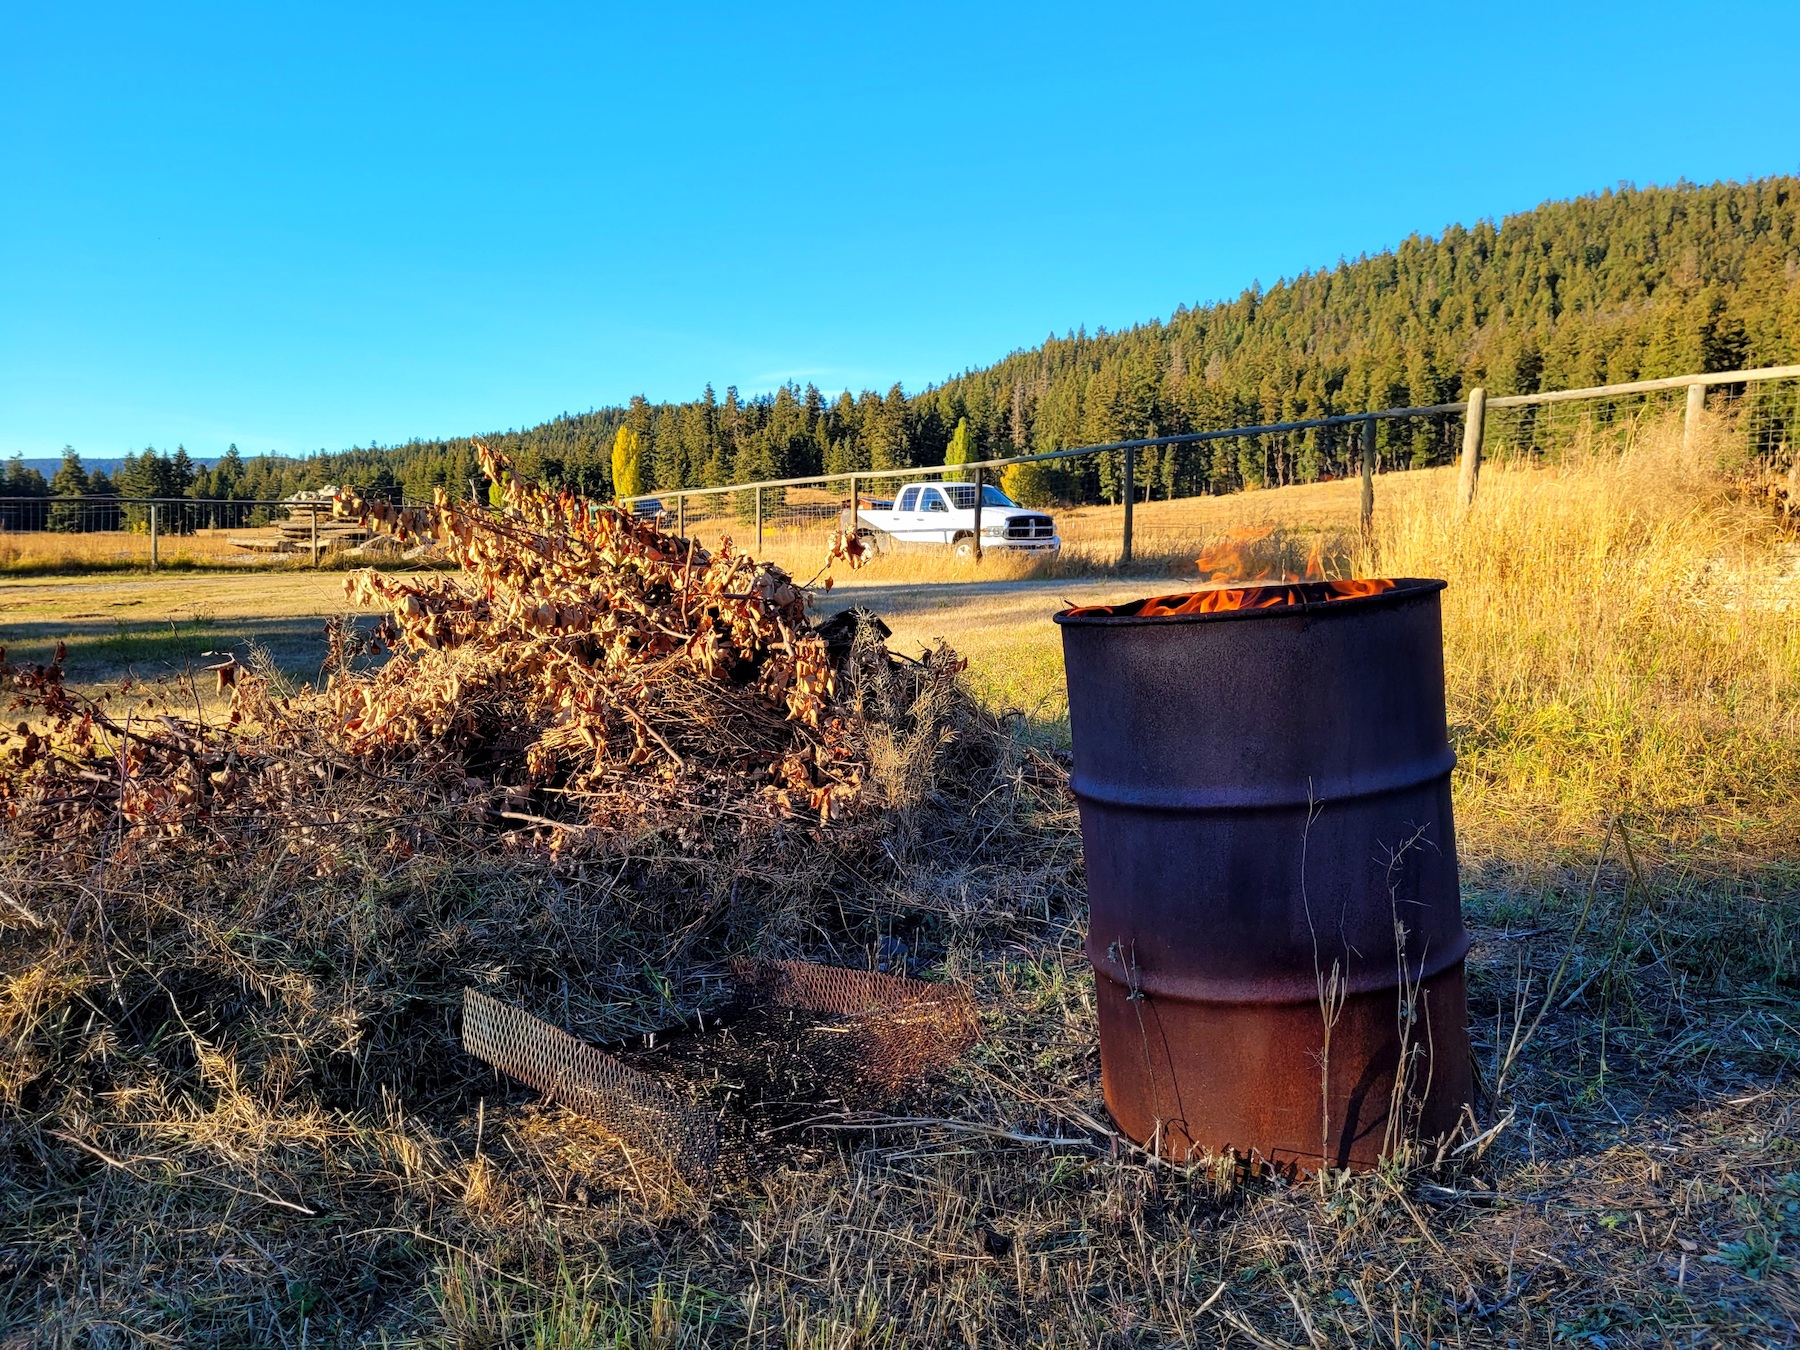 photo of a flaming burn barrel next to a pile of yard scraps, a sunny field in the background